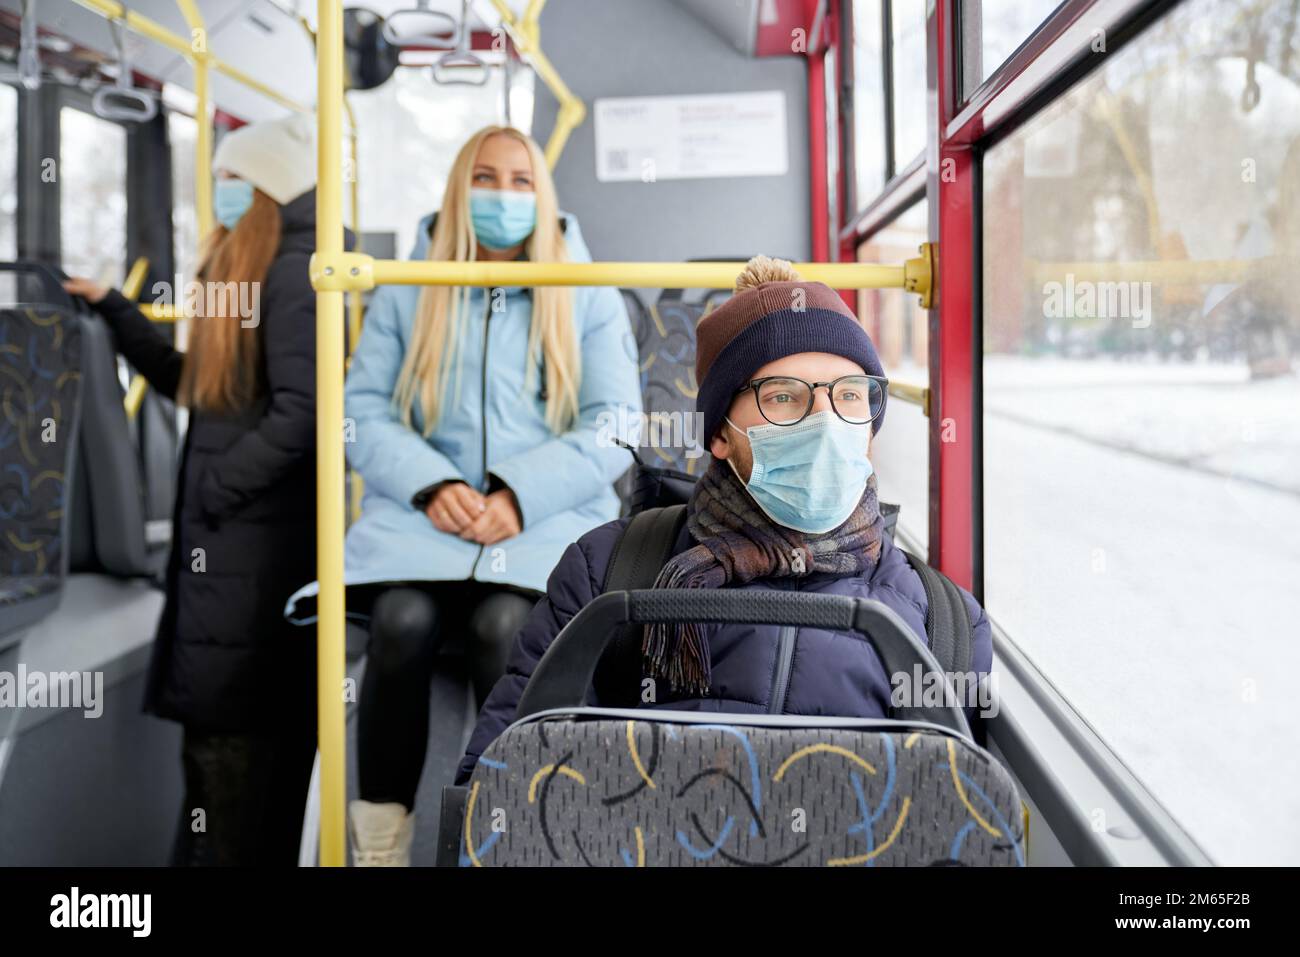 Portrait of passengers protecting themselves against coronavirus getting work home school. Ordinary day in public transport while covid spreading. Con Stock Photo